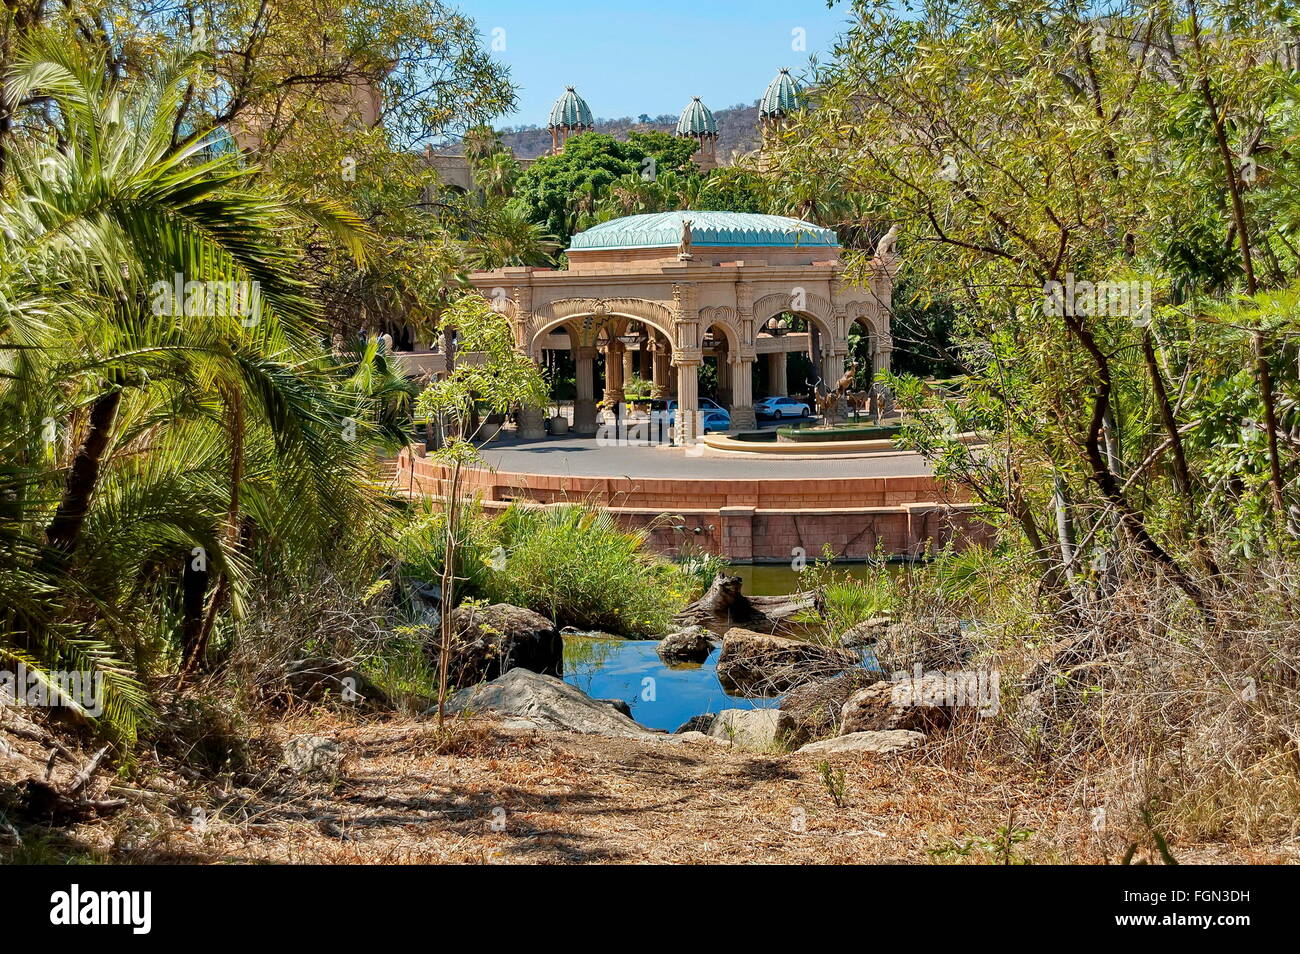 Fragment of Palace of the Lost City hotel in Sun City, South Africa Stock Photo